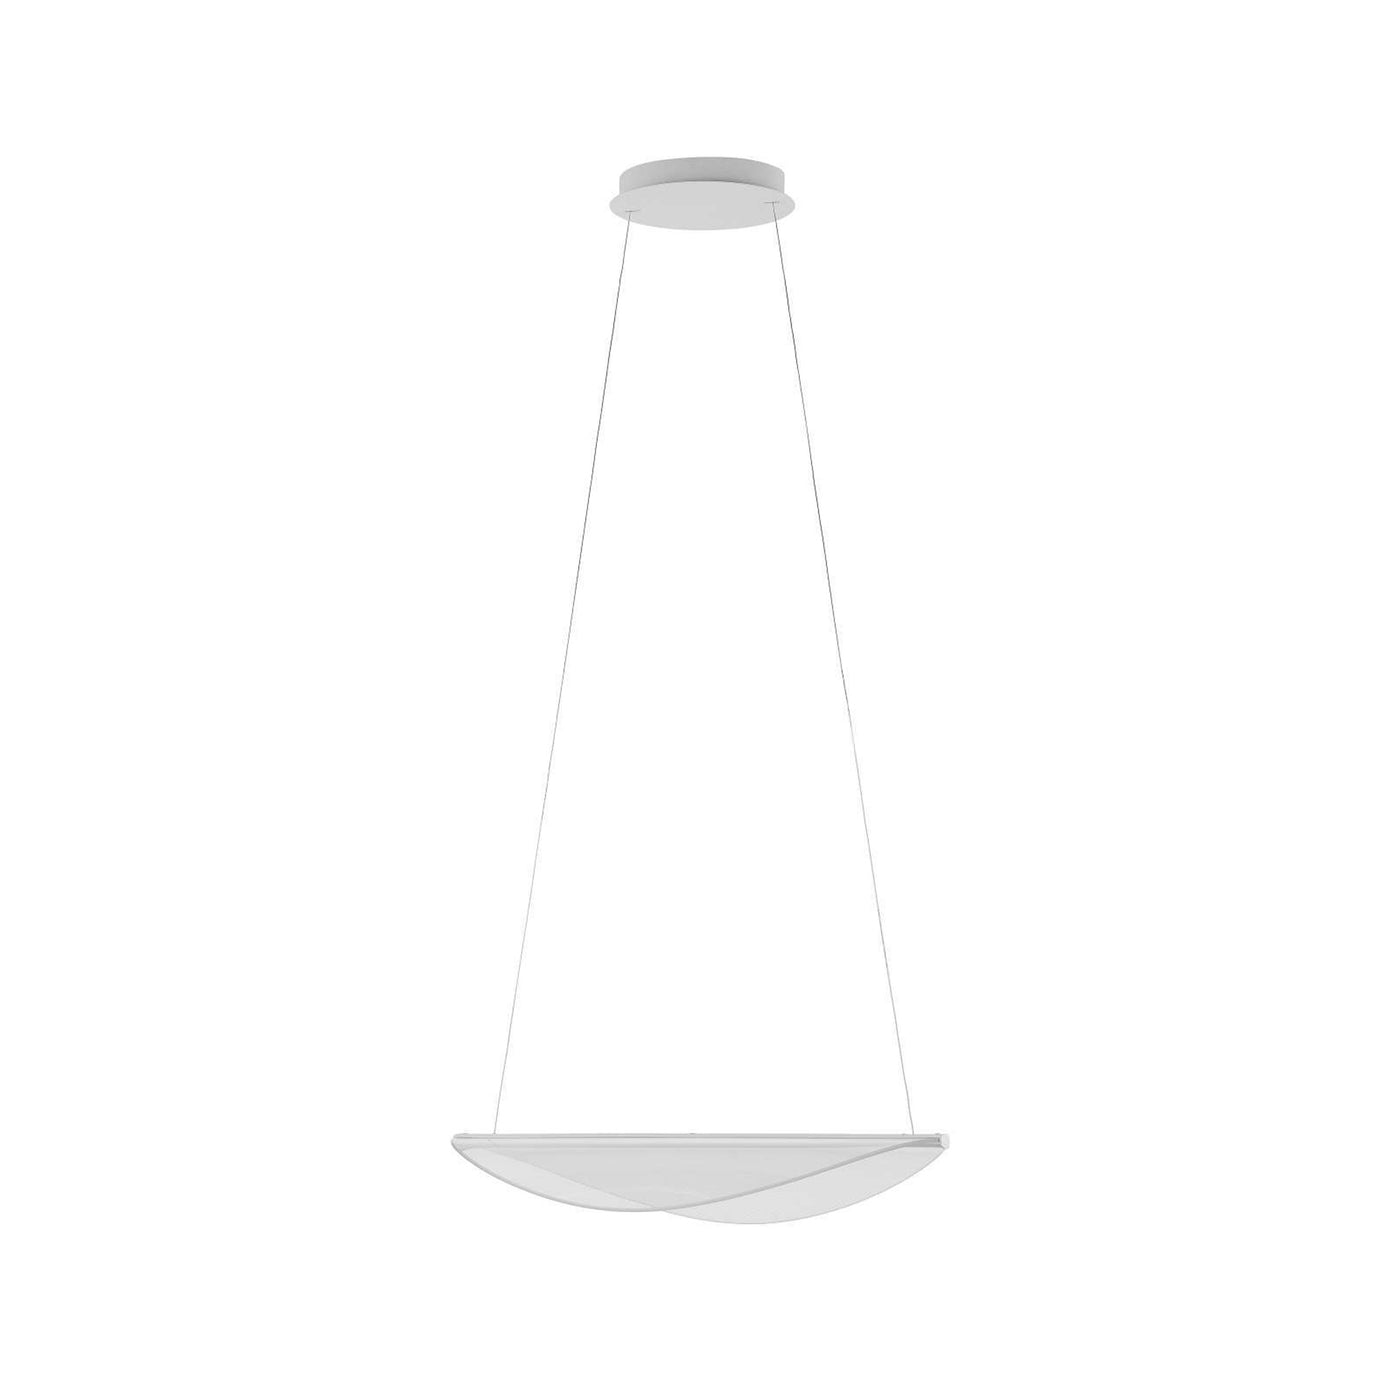 Suspension Lamp DIPHY by Mirco Crosatto for Stilnovo 01